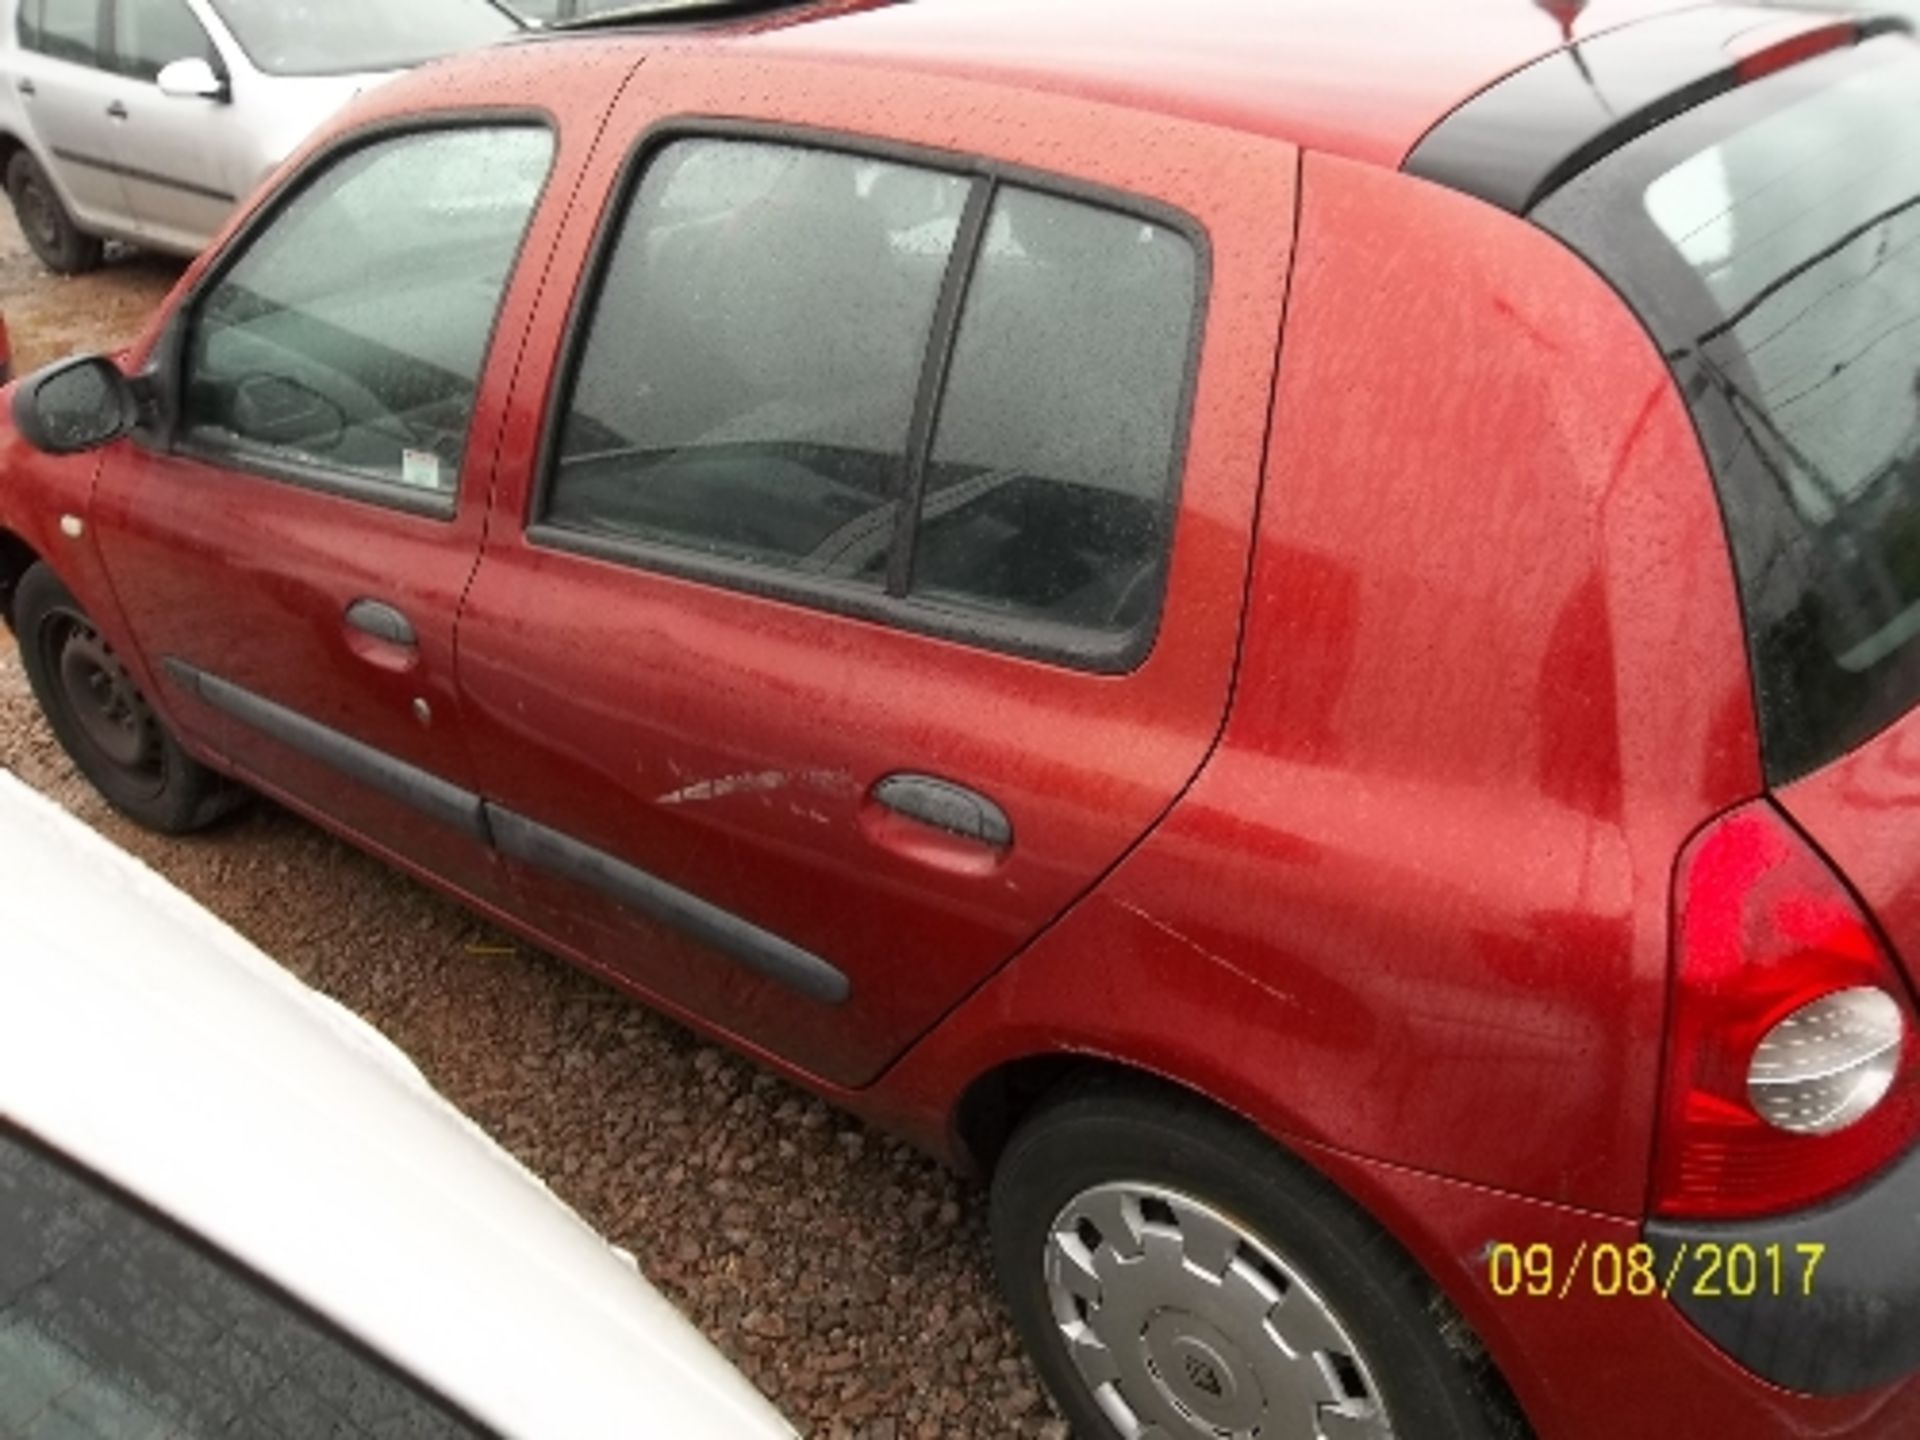 Renault Clio Expression 16V - VO54 GFA Date of registration: 29.09.2004 1390cc, petrol, 4 speed - Image 4 of 4